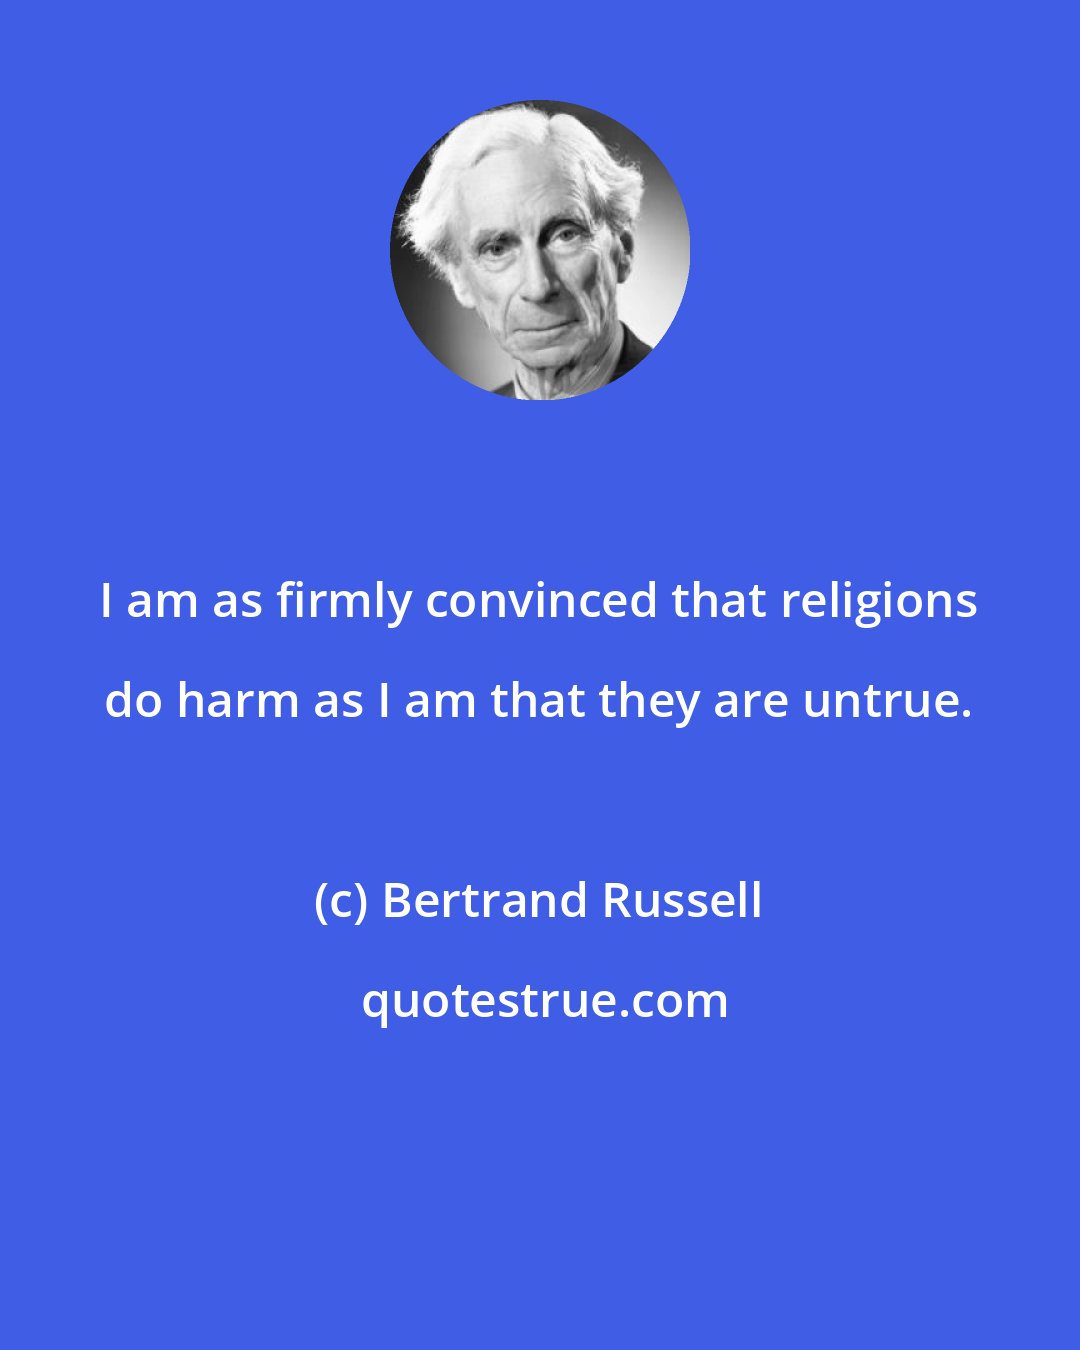 Bertrand Russell: I am as firmly convinced that religions do harm as I am that they are untrue.